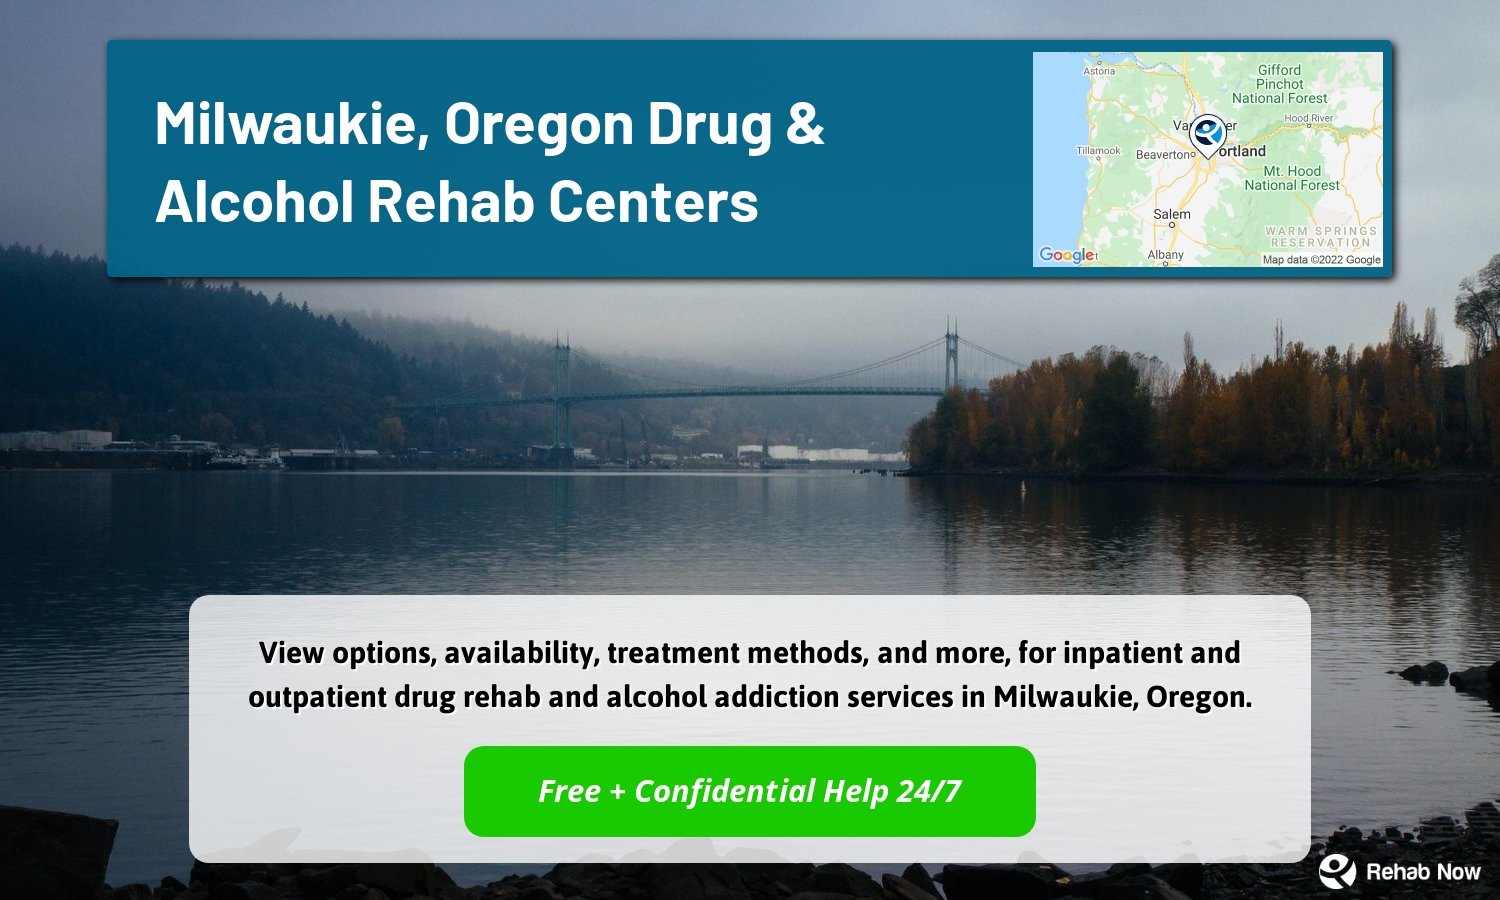 View options, availability, treatment methods, and more, for inpatient and outpatient drug rehab and alcohol addiction services in Milwaukie, Oregon.